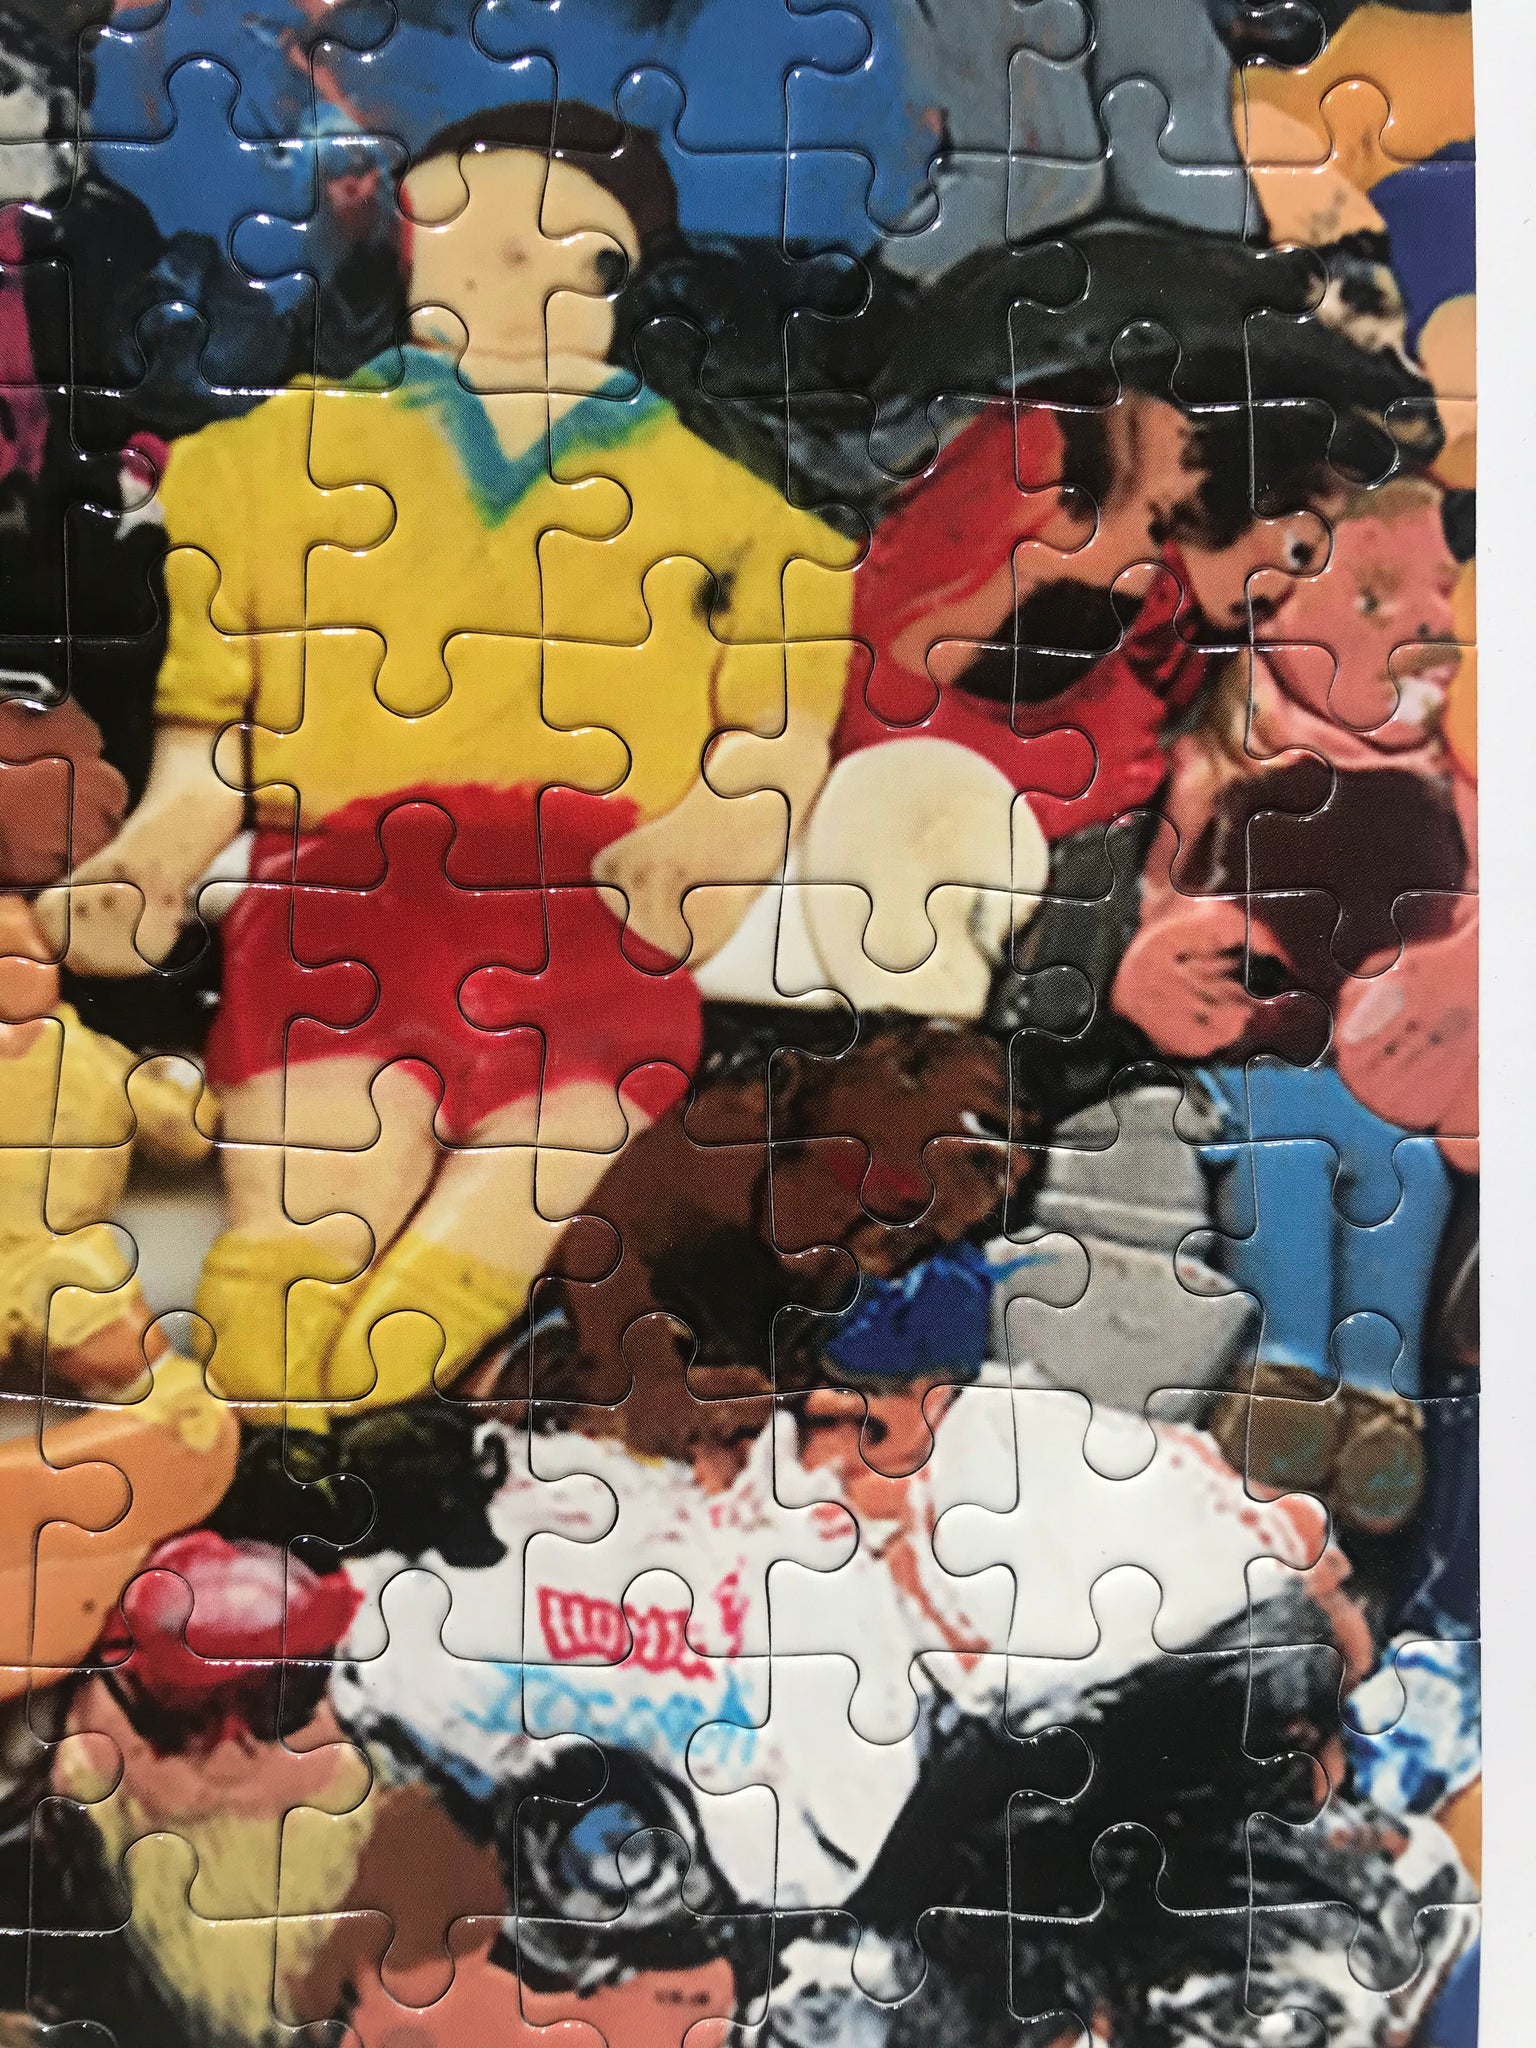 Artist Stephen Shanabrook Collector Edition Jigsaw Puzzle